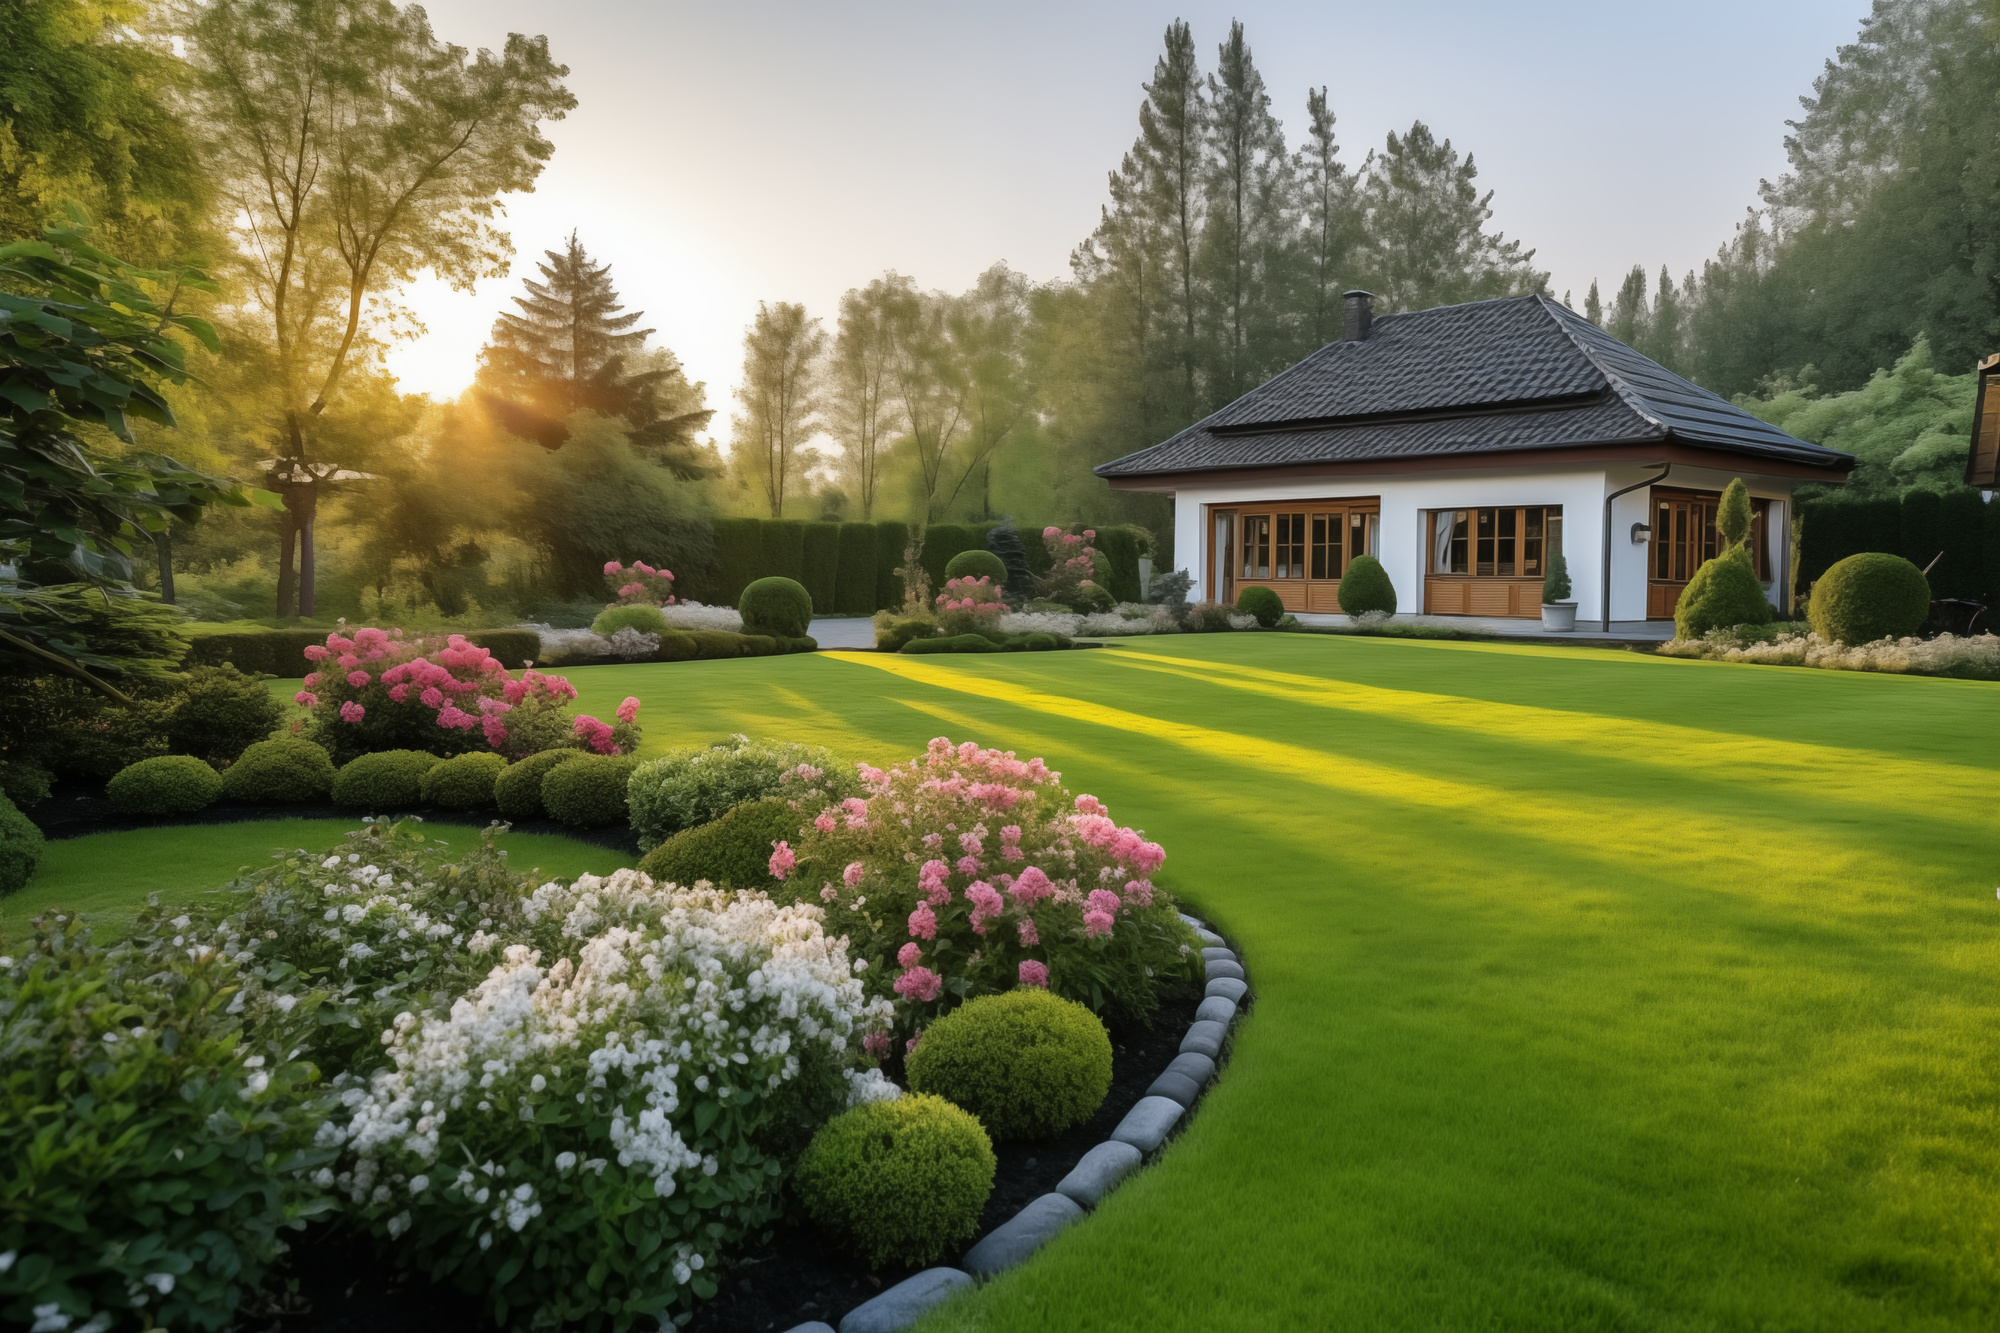 Sunrise over landscaped garden with house